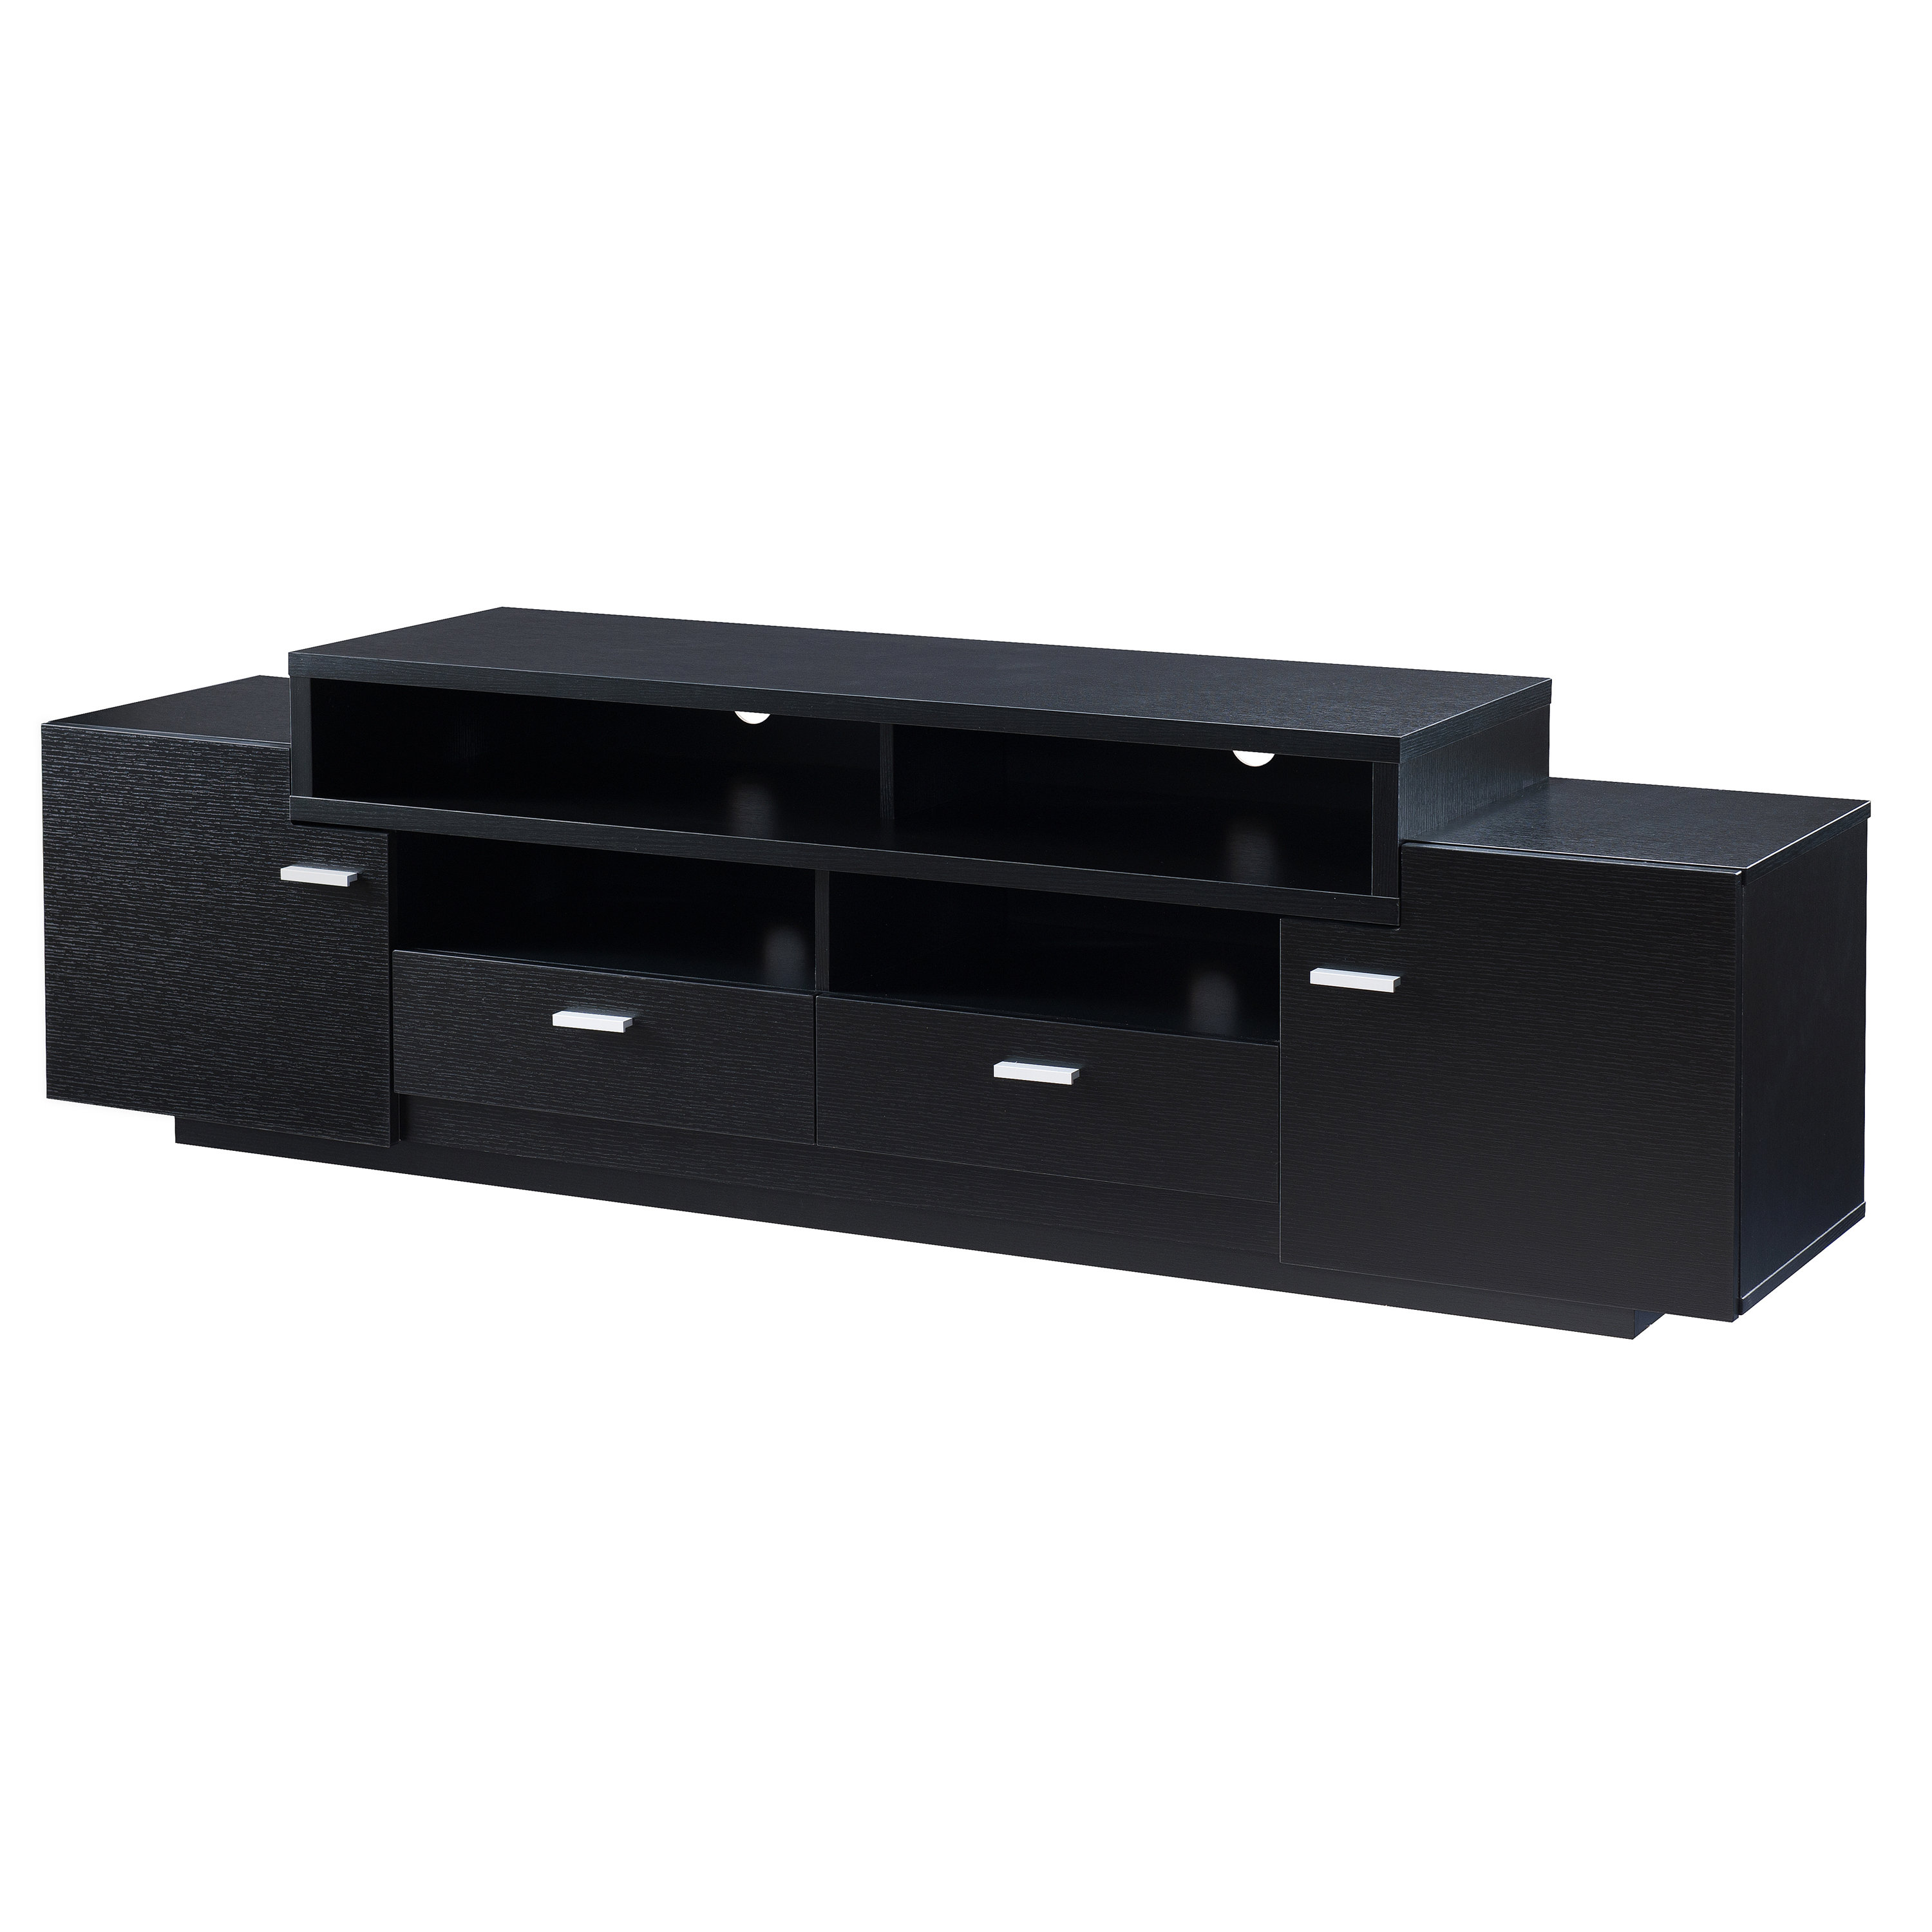 Aston Tv Stand For Tvs Up To 78 Reviews Allmodern